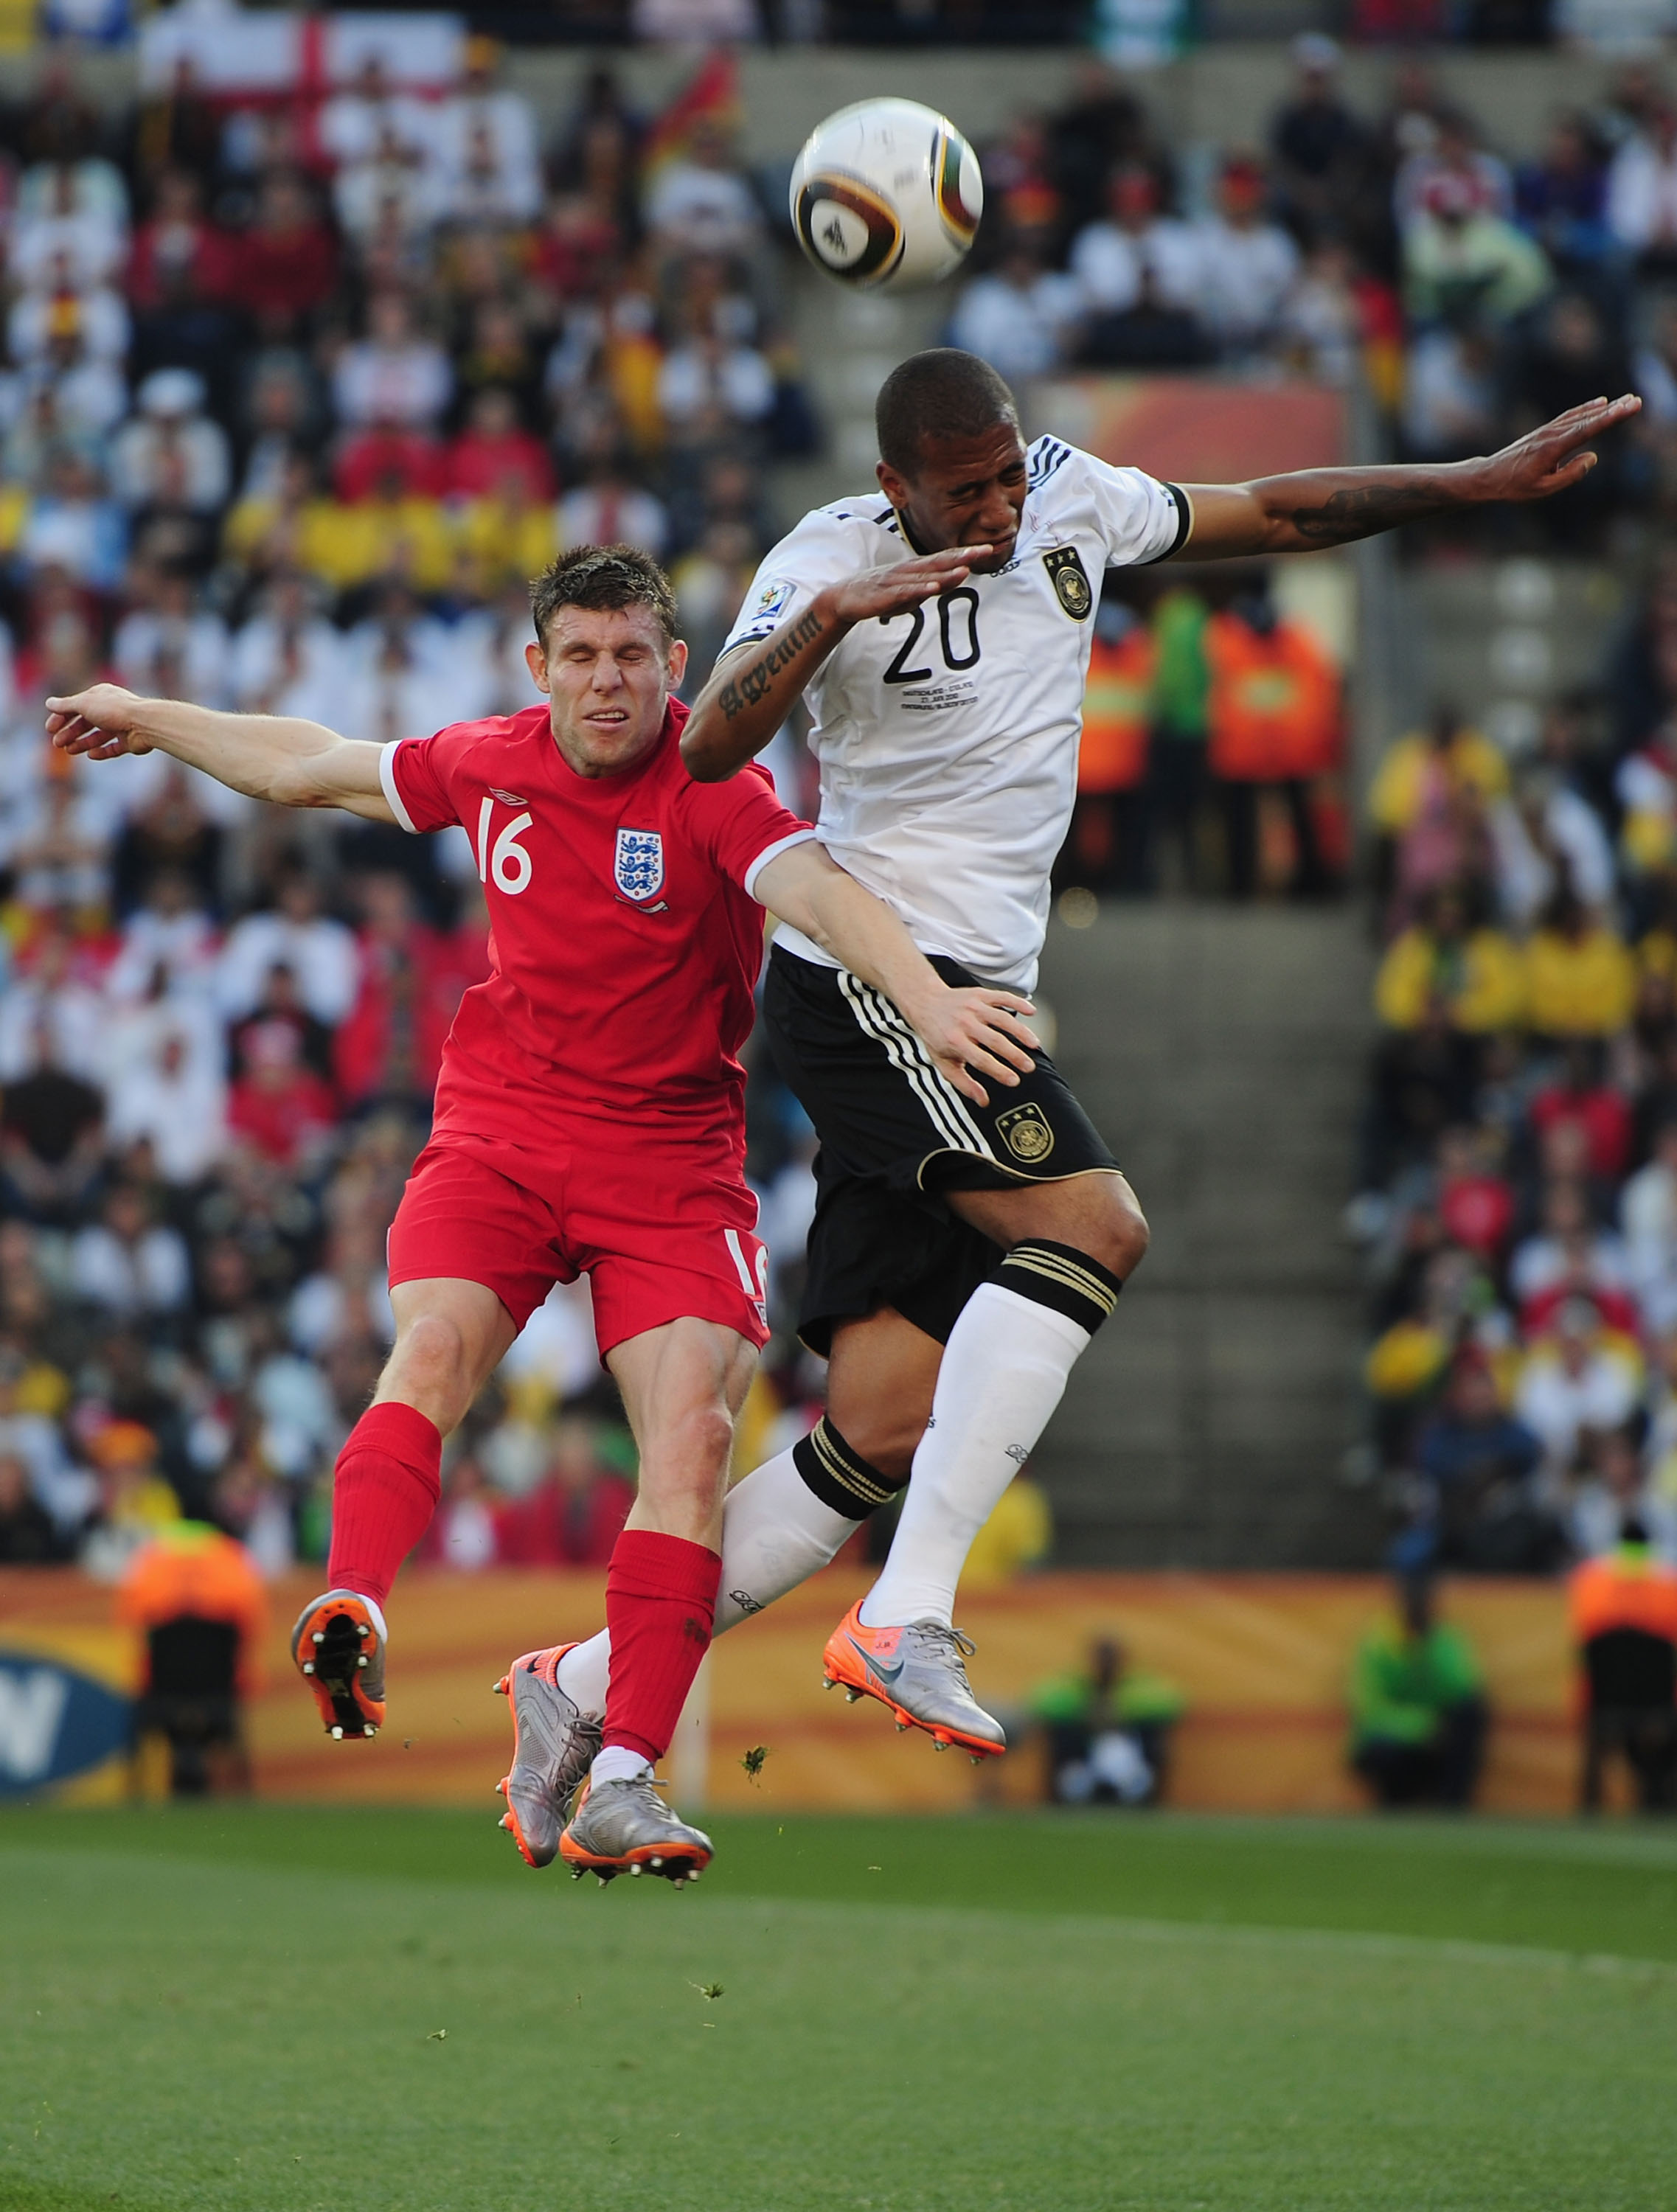 BLOEMFONTEIN, SOUTH AFRICA - JUNE 27: James Milner of England and Jerome Boateng of Germany jump for the ball during the 2010 FIFA World Cup South Africa Round of Sixteen match between Germany and England at Free State Stadium on June 27, 2010 in Bloemfon